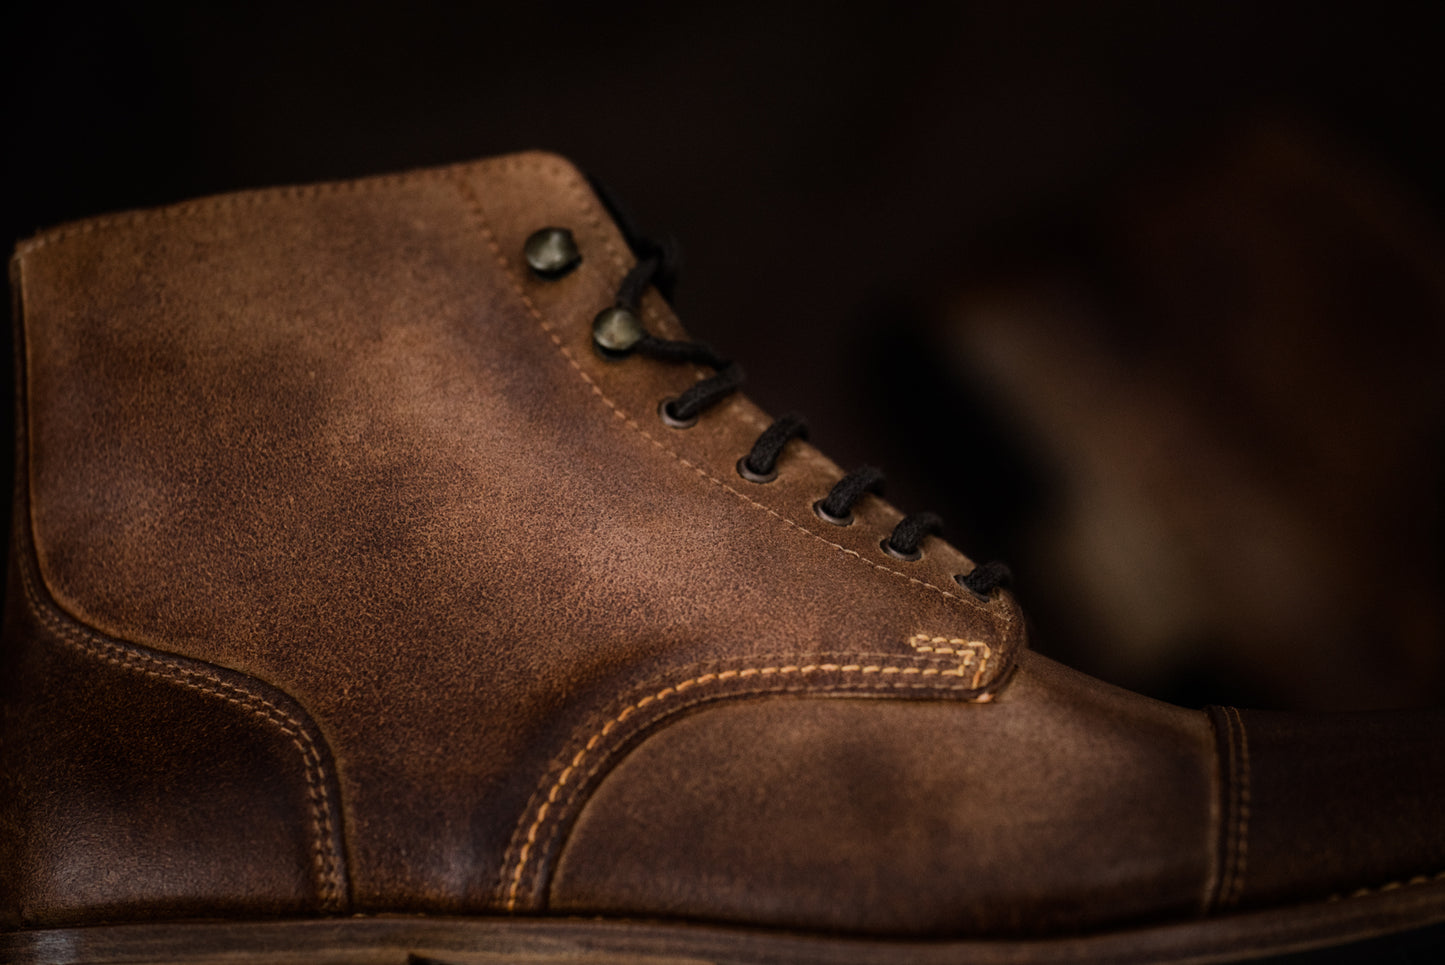 Tejo Premium Boots - OldMulla - Boots Store, Handmade By George